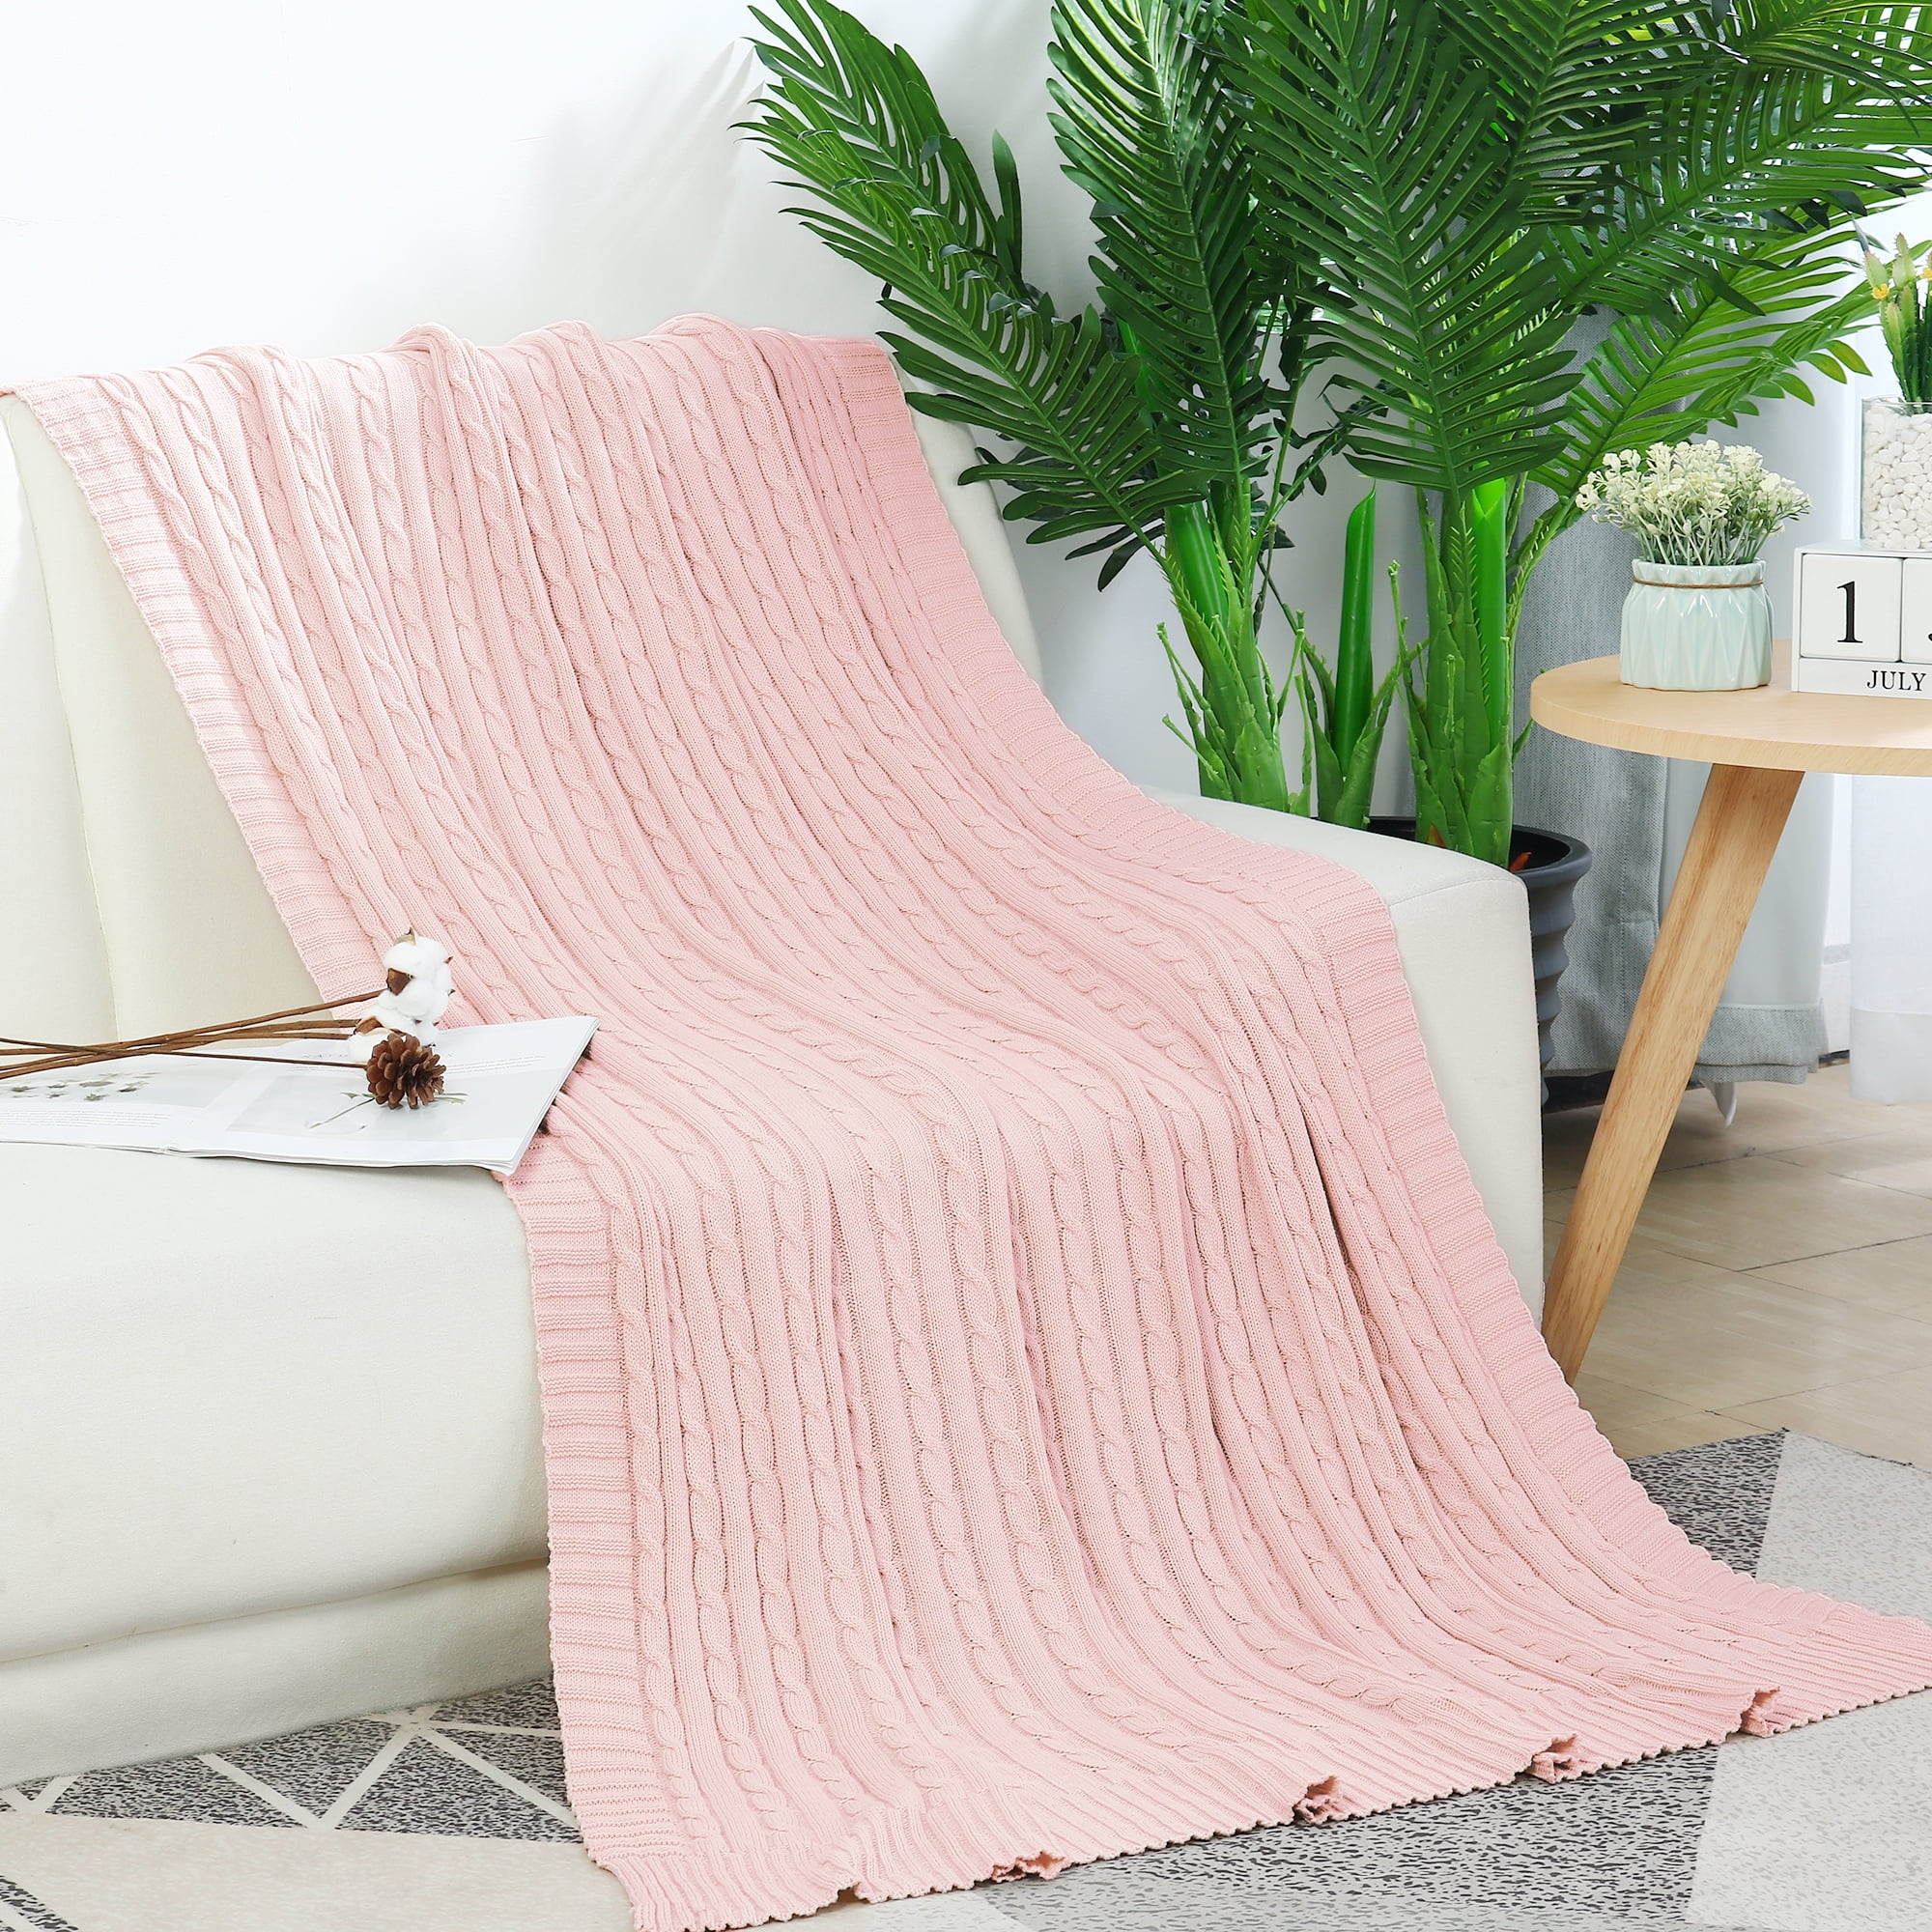 Cotton Blanket Soft Warm Cable Knit Throw Home Bedding Blanket Pale Pink 50x60 Walmart Canada